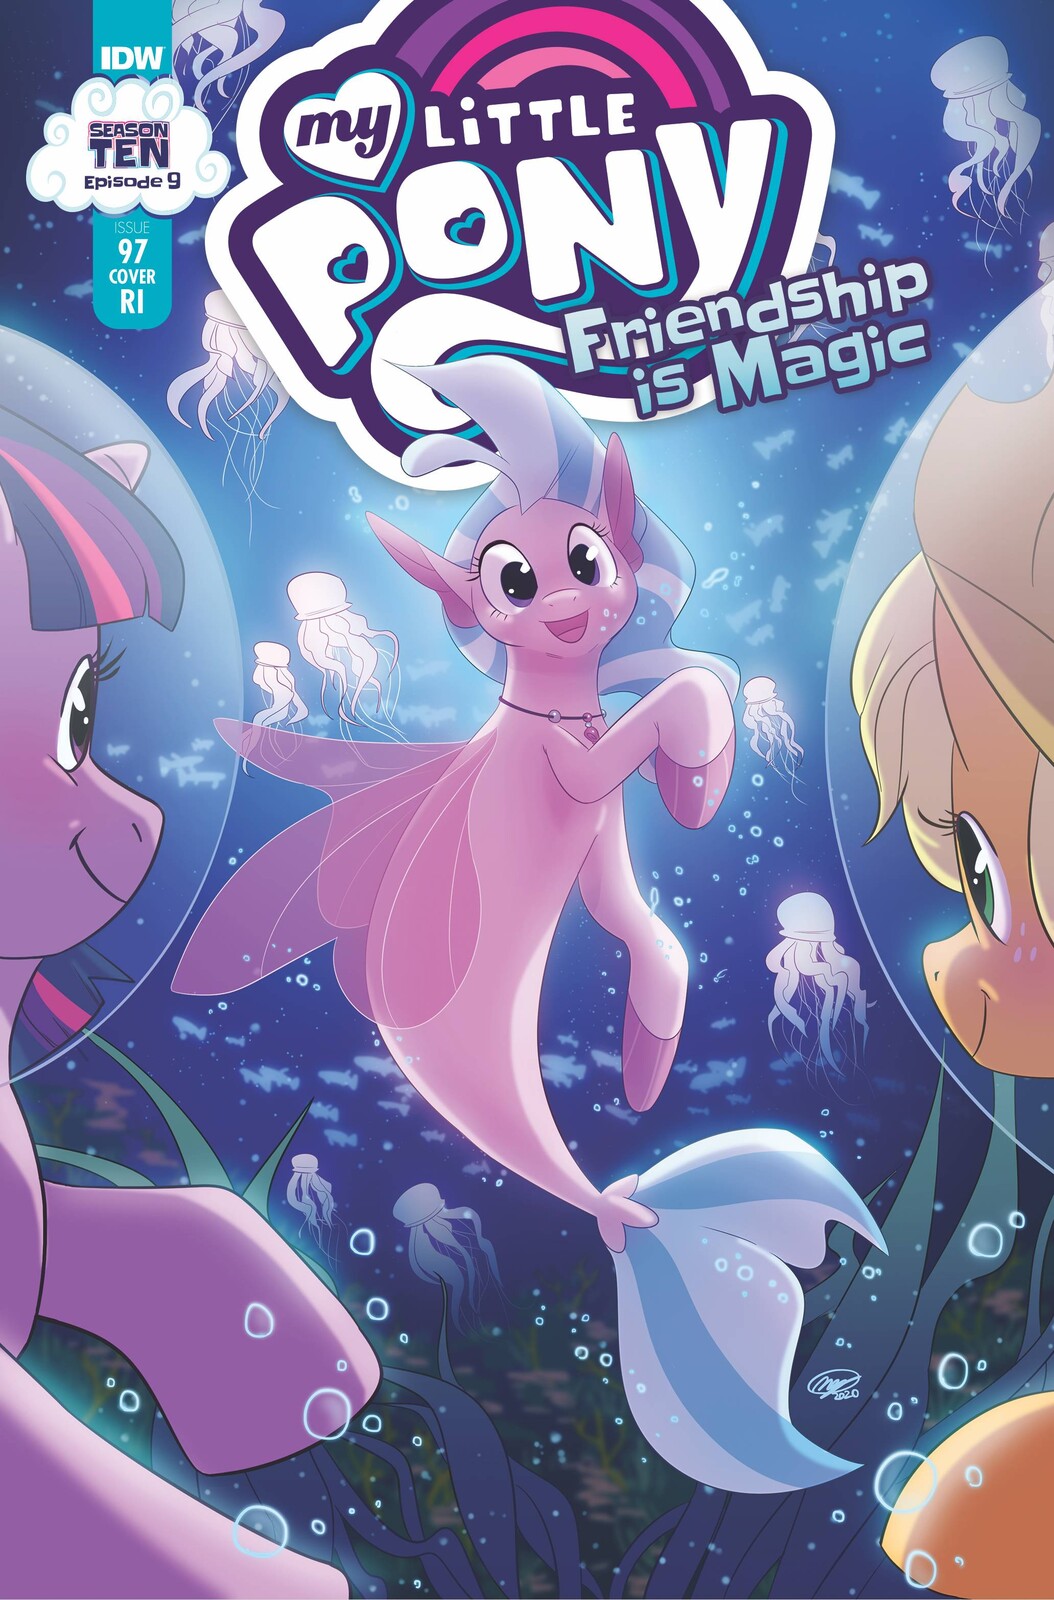 My little pony RI variant cover (official)